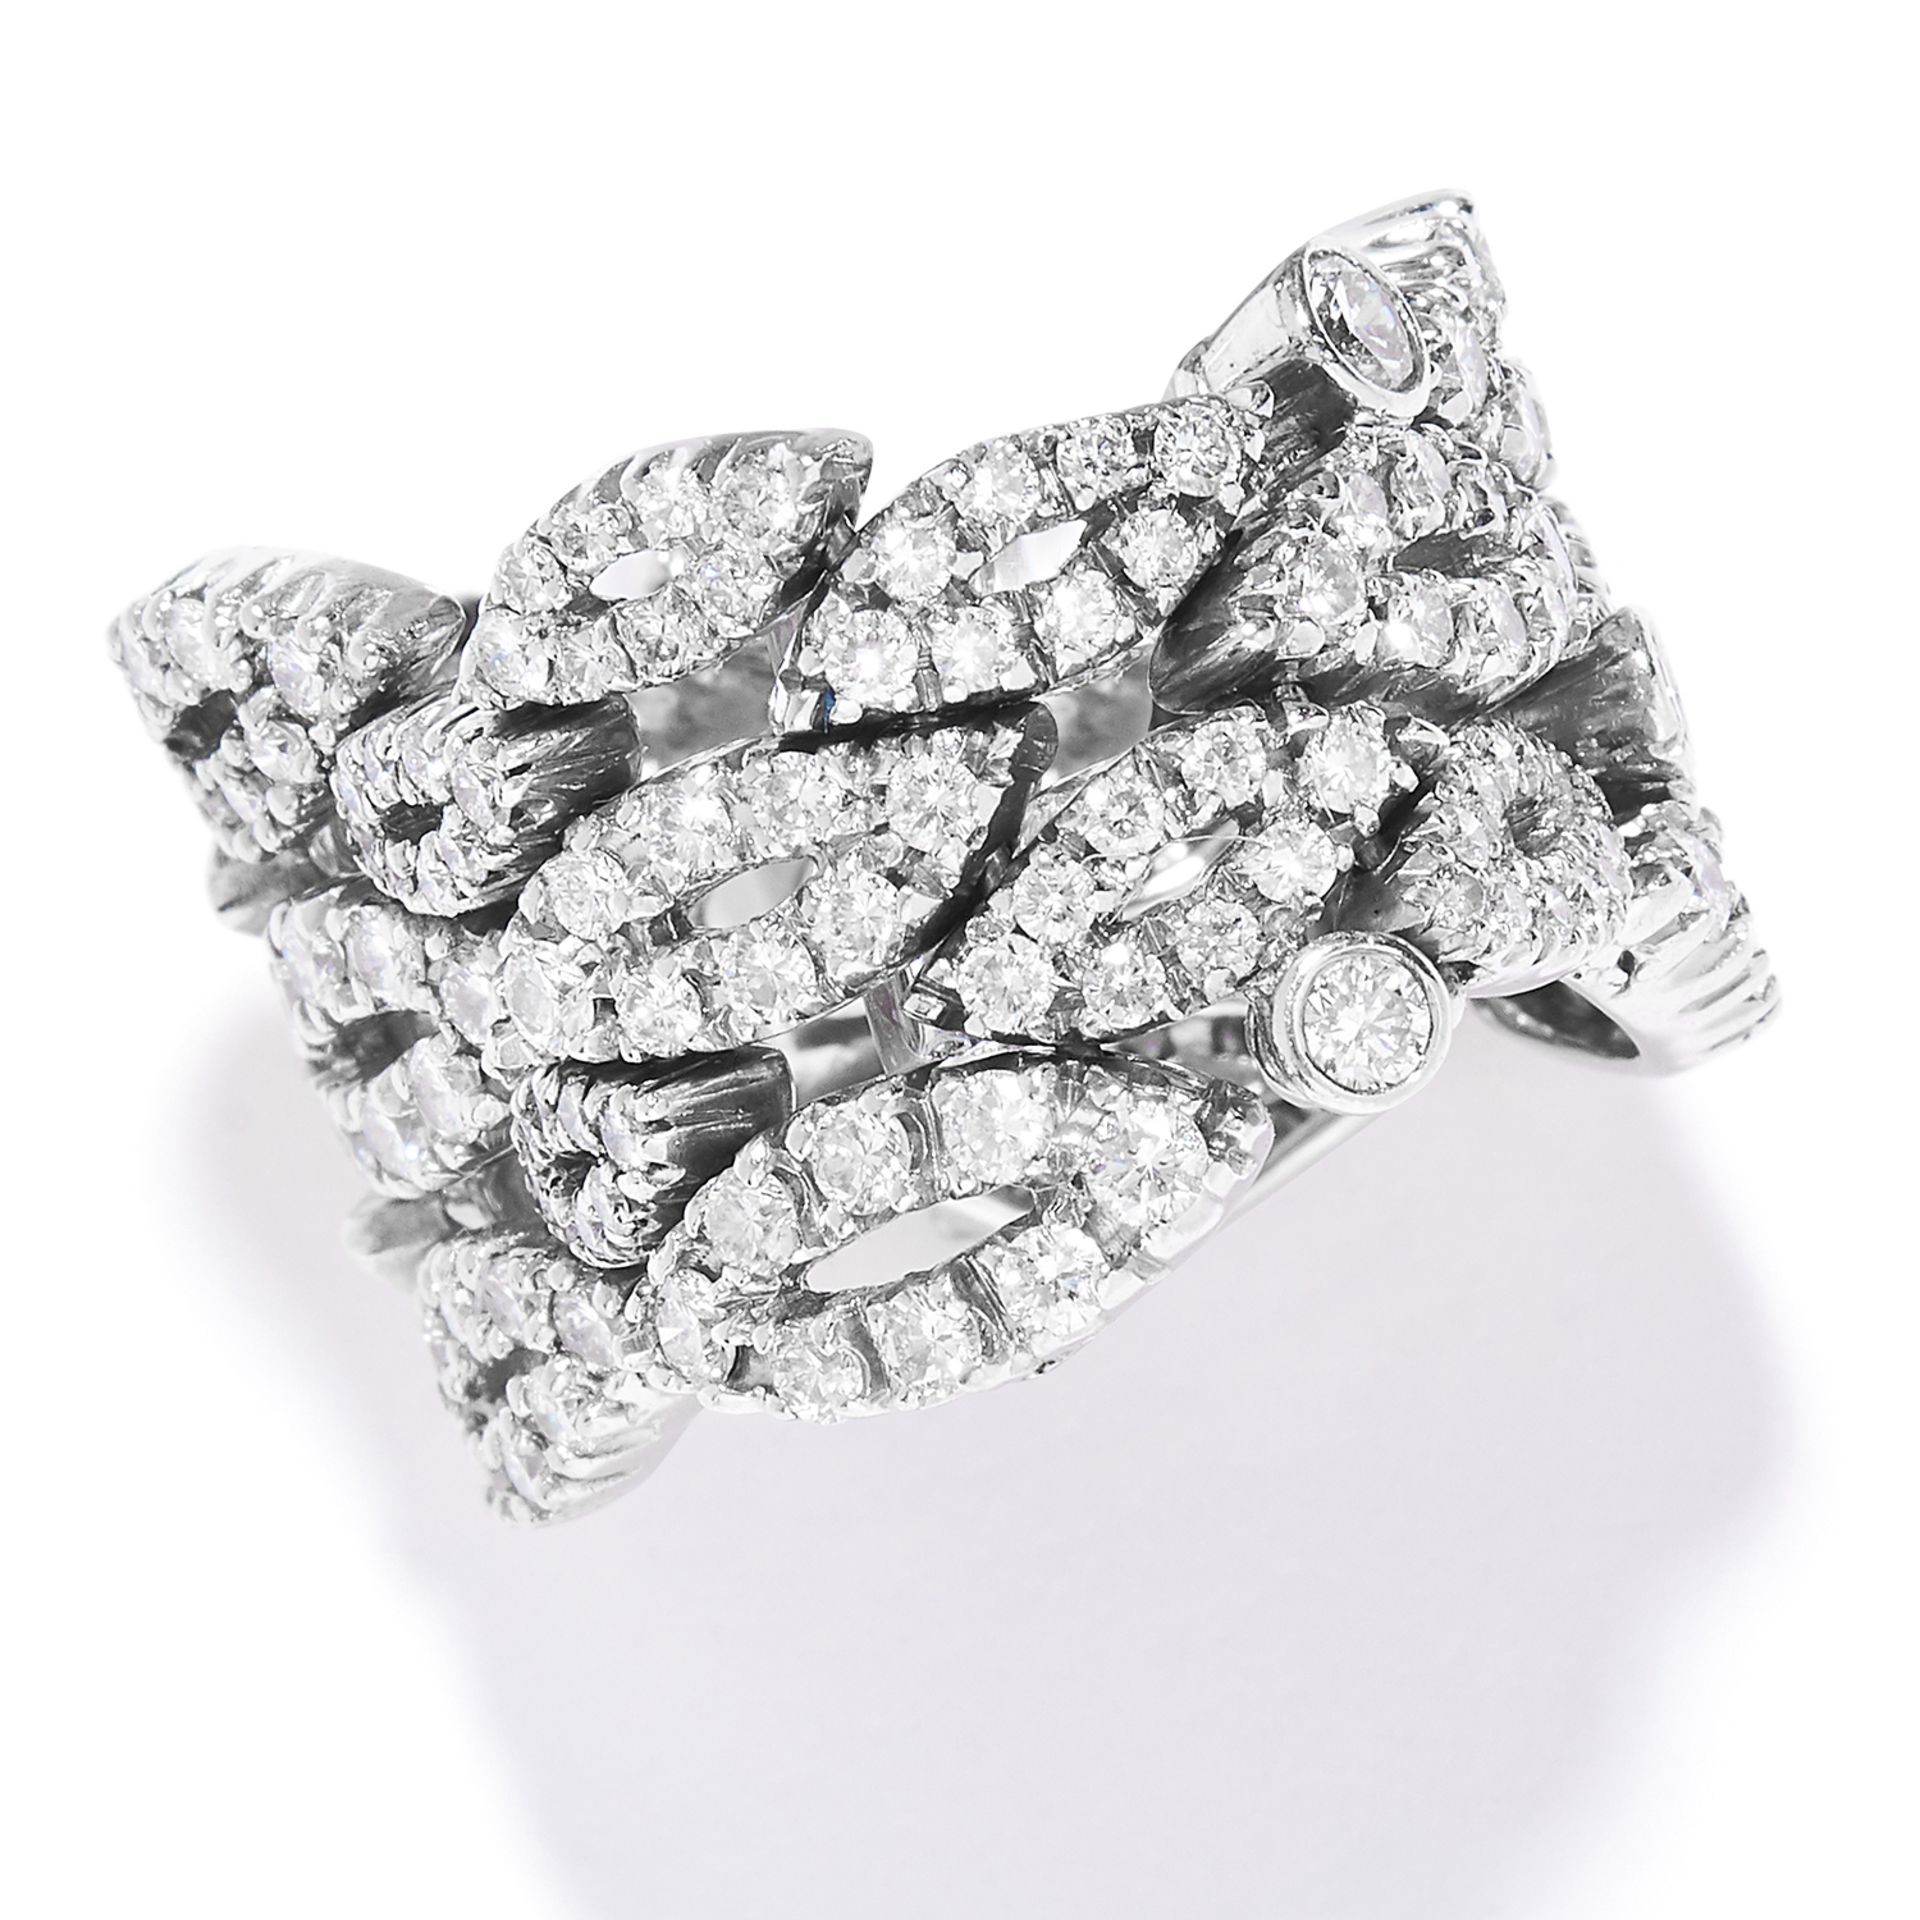 DIAMOND DRESS RING in white gold or platinum, in articulated design, set with round cut diamonds,